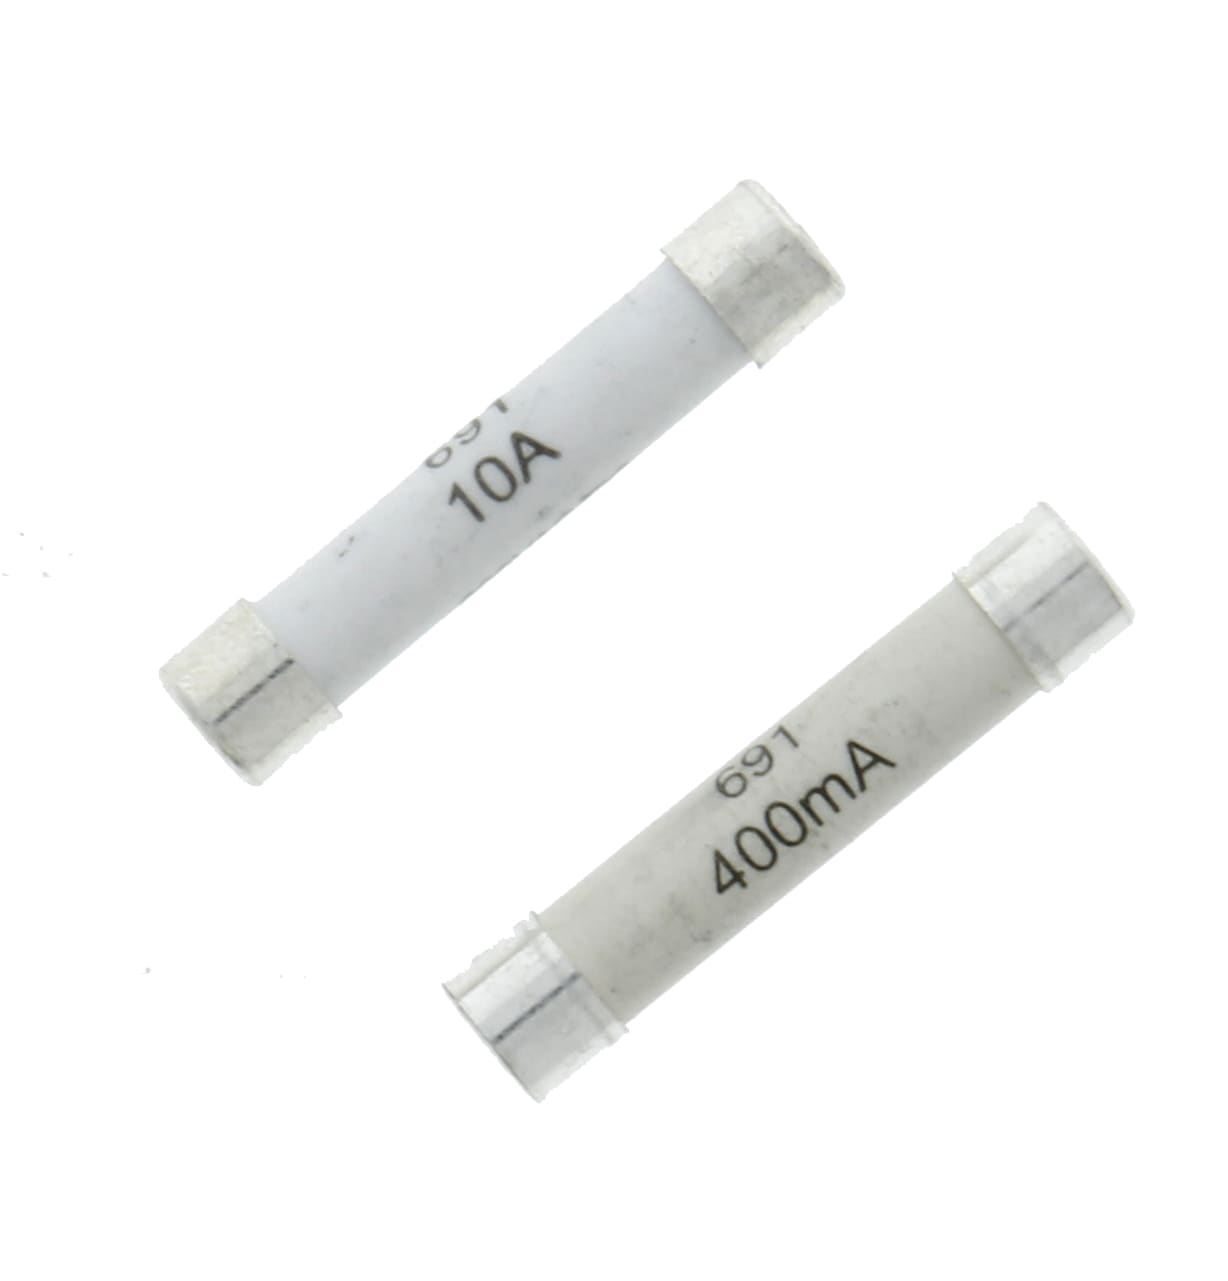 2pcs FF10A 600V Very Fast Acting 10A Multimeter Fuse Brass, Nickel-Plated  Fuse 6.3 x 32mm